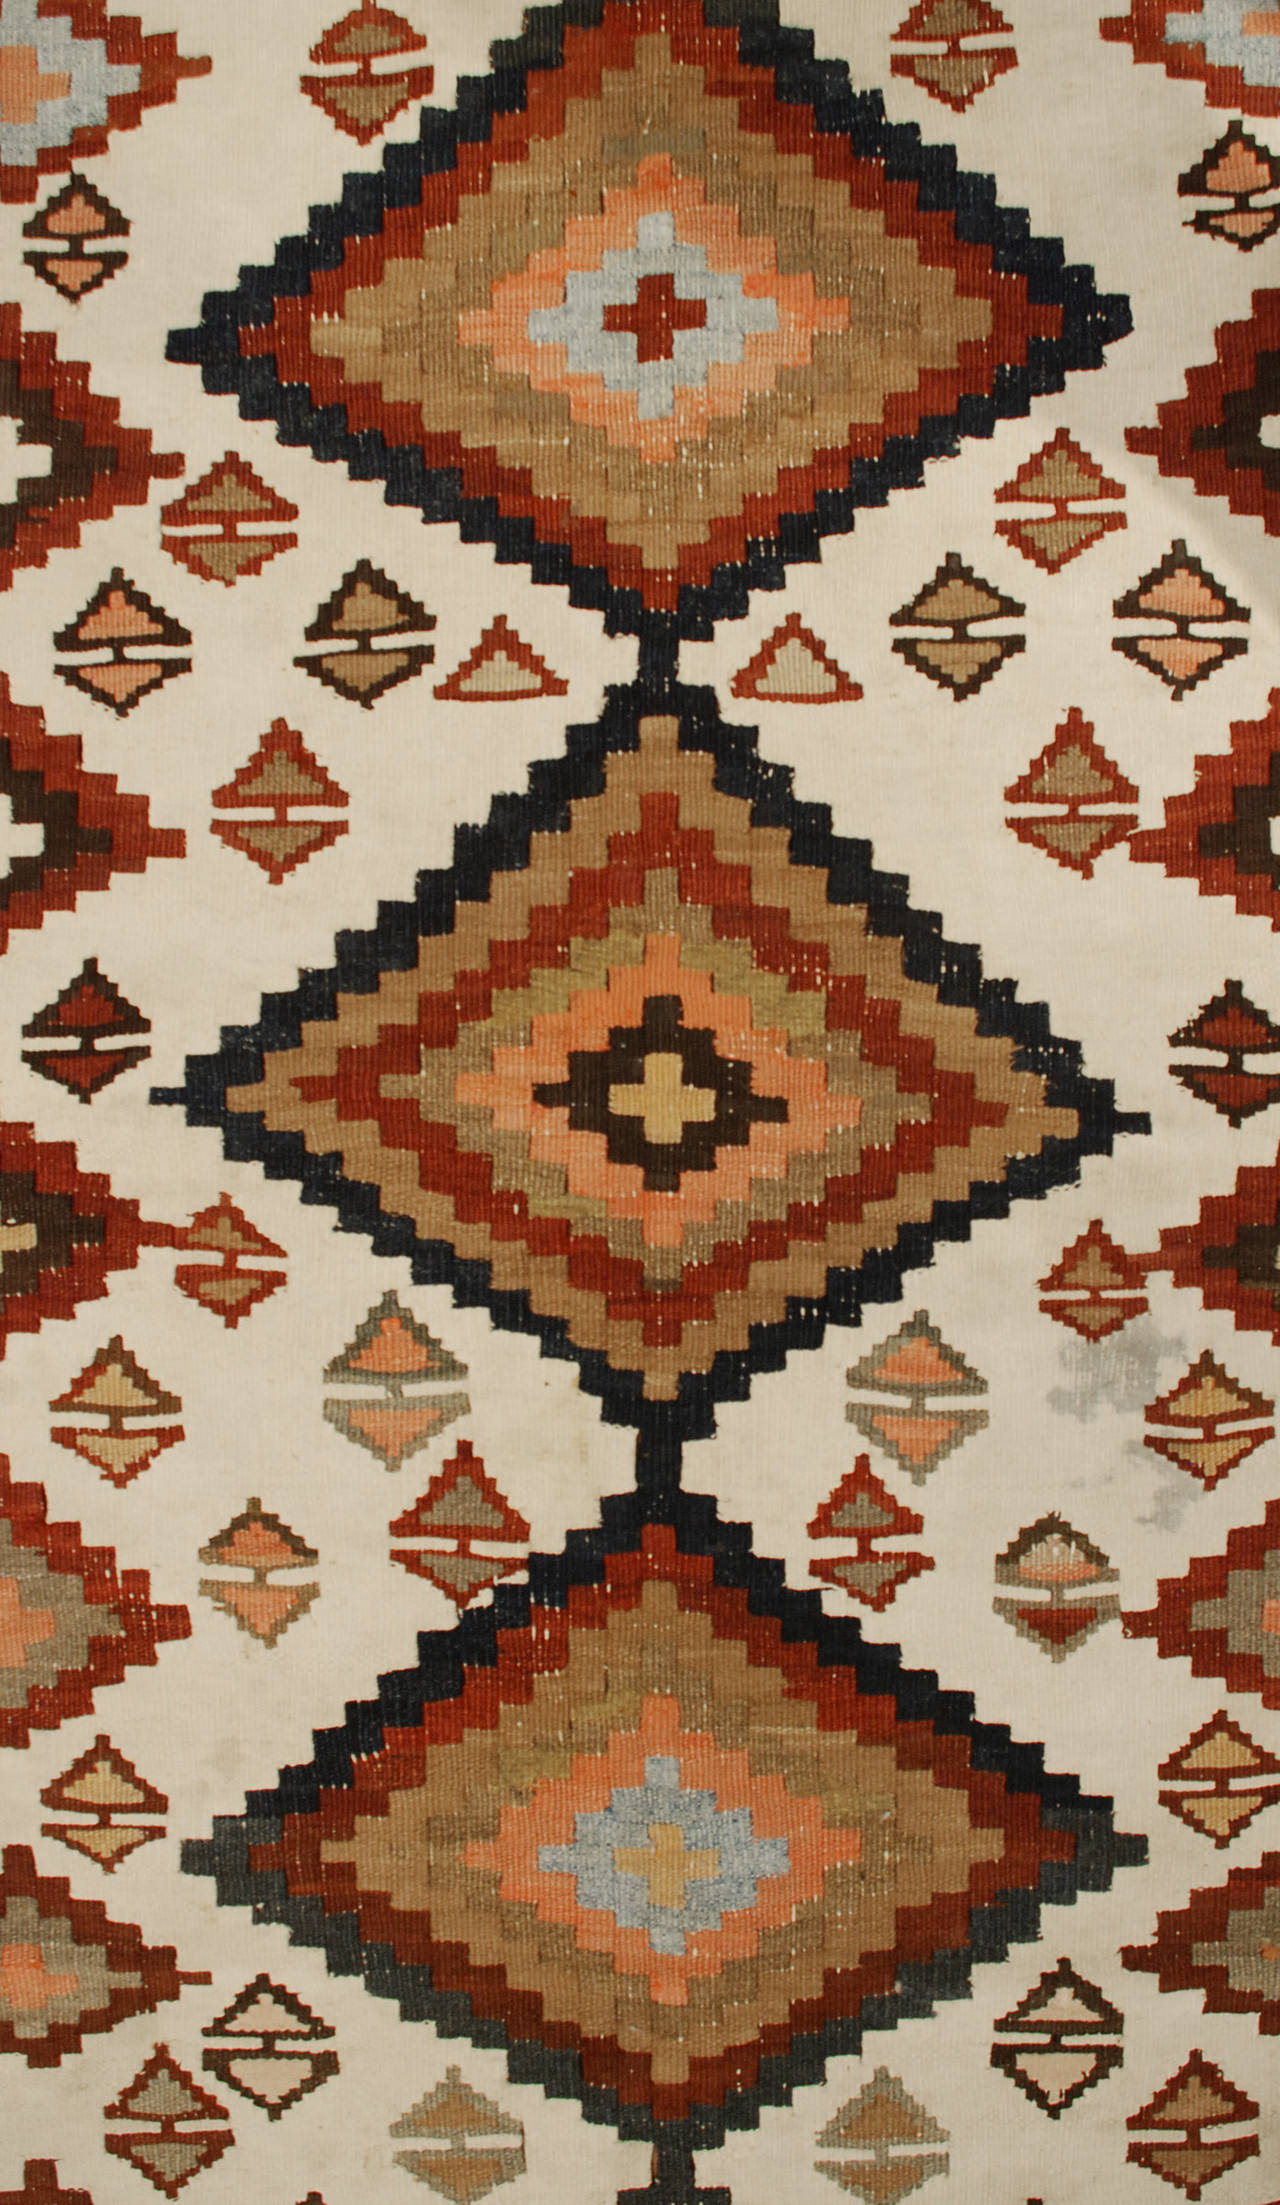 An early 20th century Persian Ersin Kilim runner with a wonderful all-over diamond pattern on a cream background, surrounded by a contrasting geometric border.